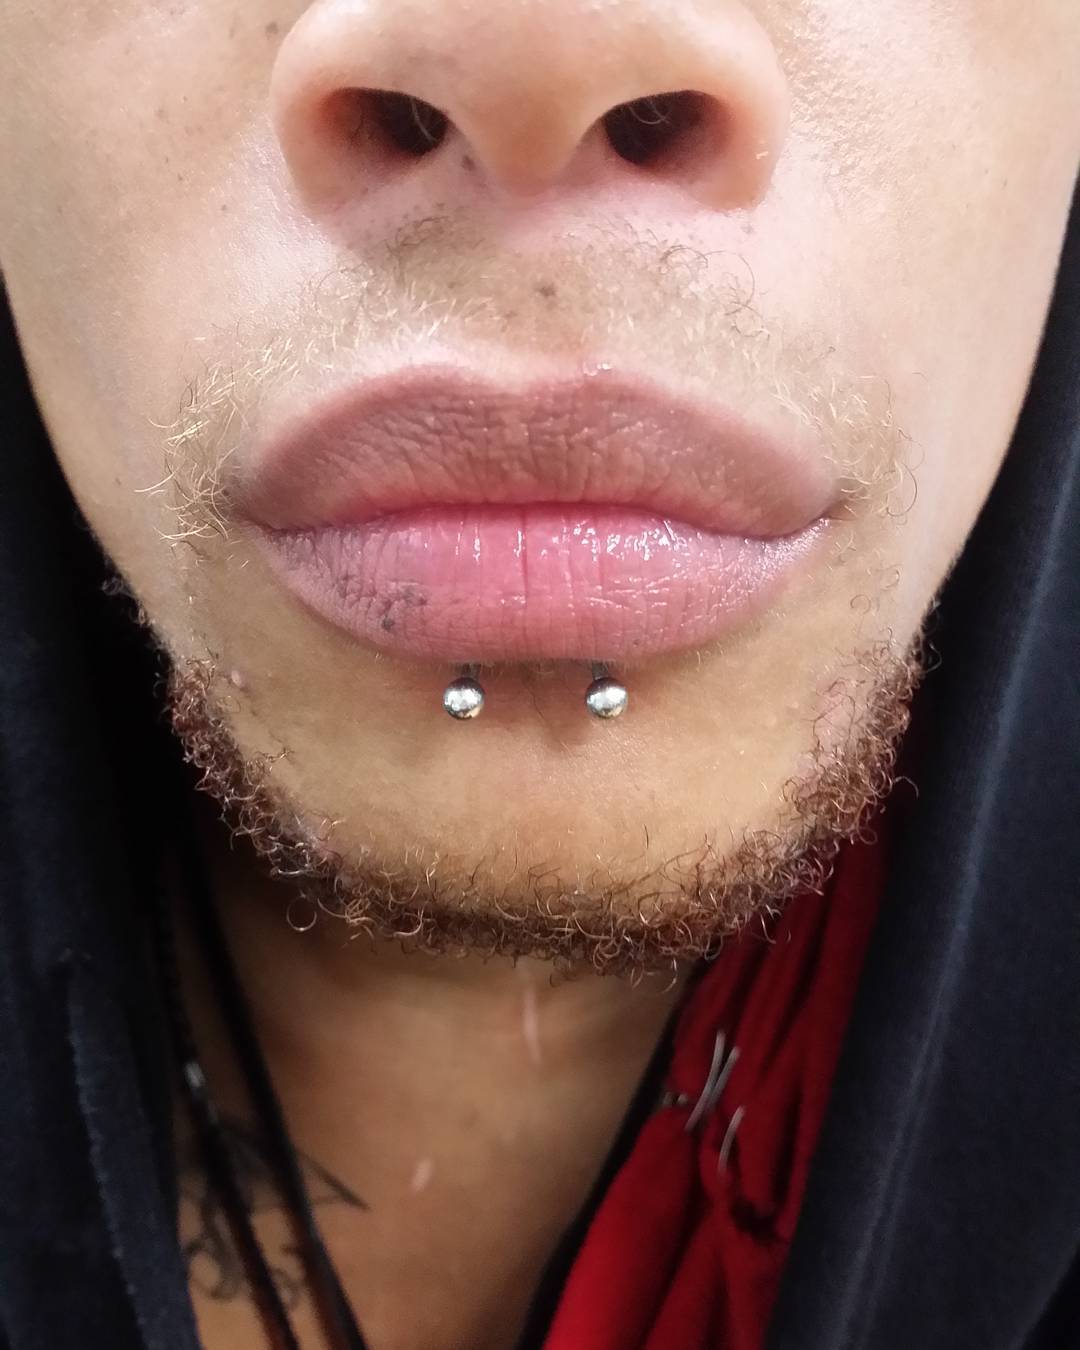 dolphin bites piercing on men with big lips